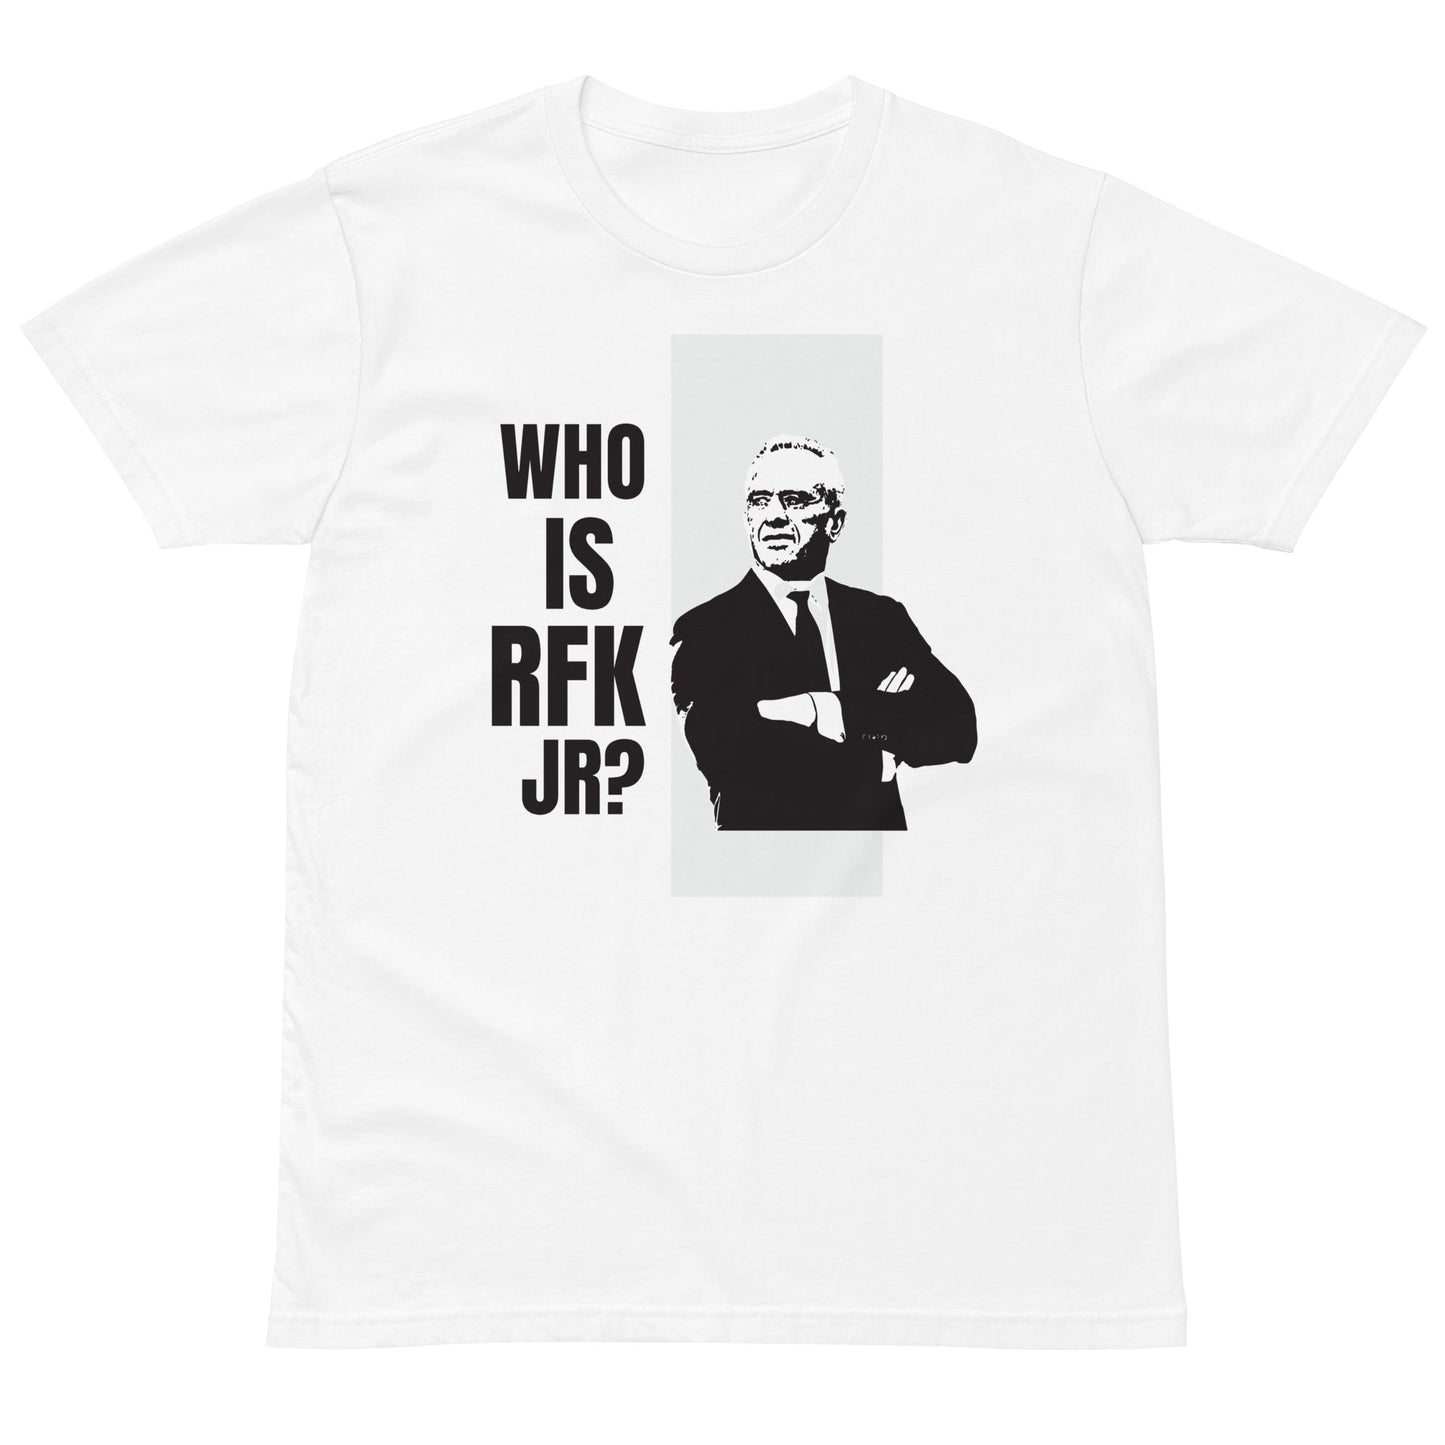 Who is RFK Jr? Unisex Premium Tee - TEAM KENNEDY. All rights reserved